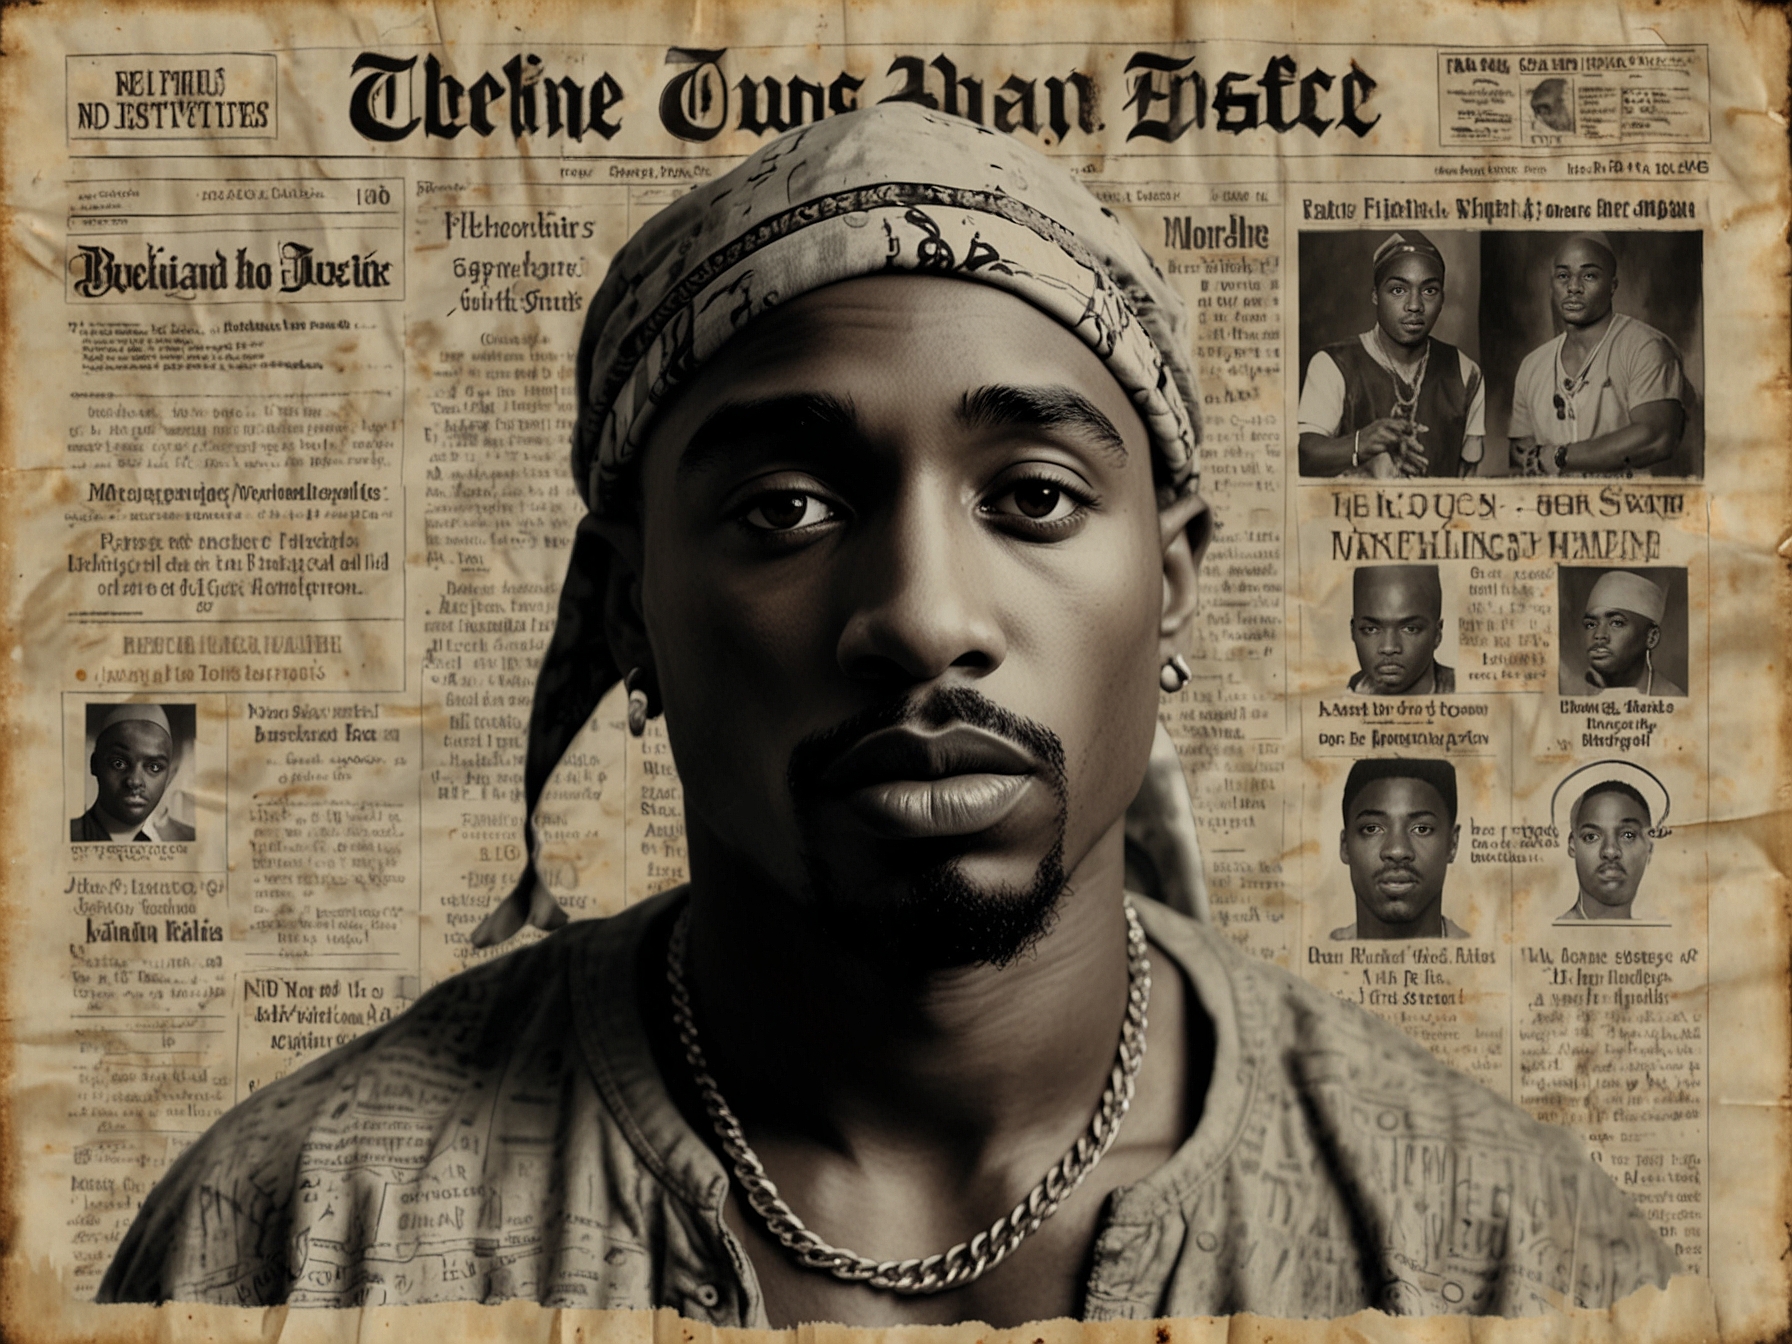 A collage featuring Tupac Shakur’s iconic images juxtaposed with news headlines about Duane ‘Keefe D’ Davis, symbolizing the enduring quest for justice and the media frenzy surrounding the case.